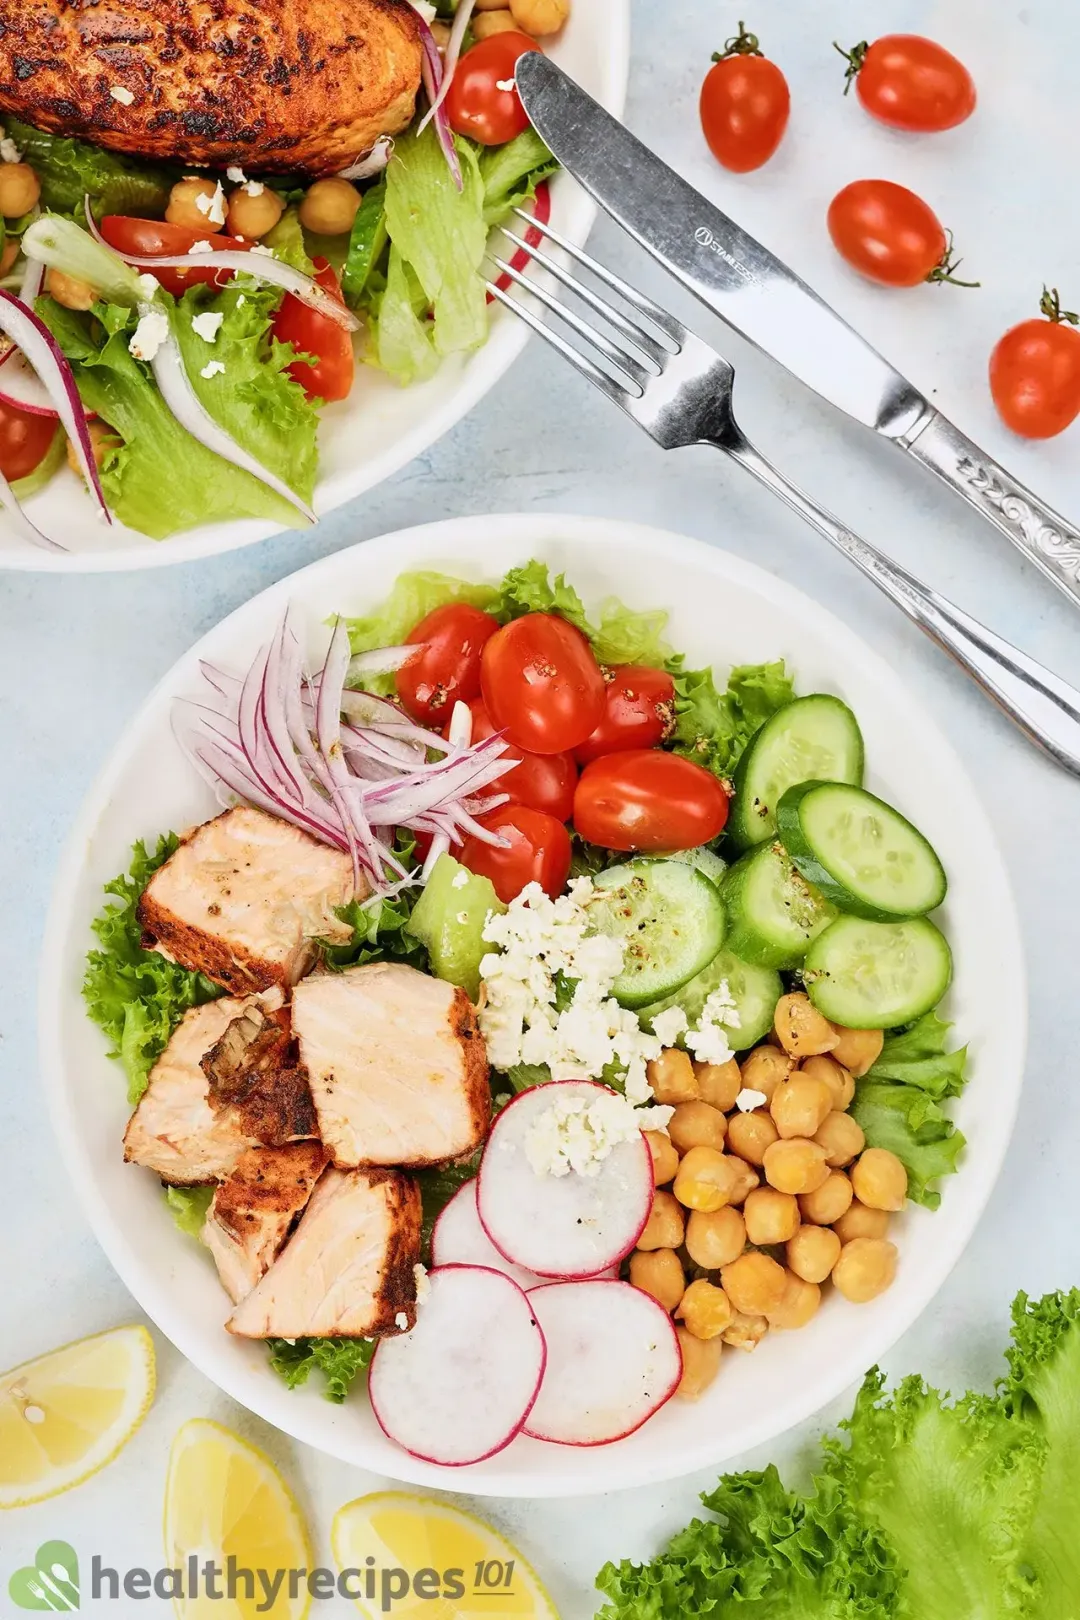 A round white plate containing a salmon salad laid near lemon wedges, cherry tomatoes, a dinner knife, a fork, and another plate of salmon salad